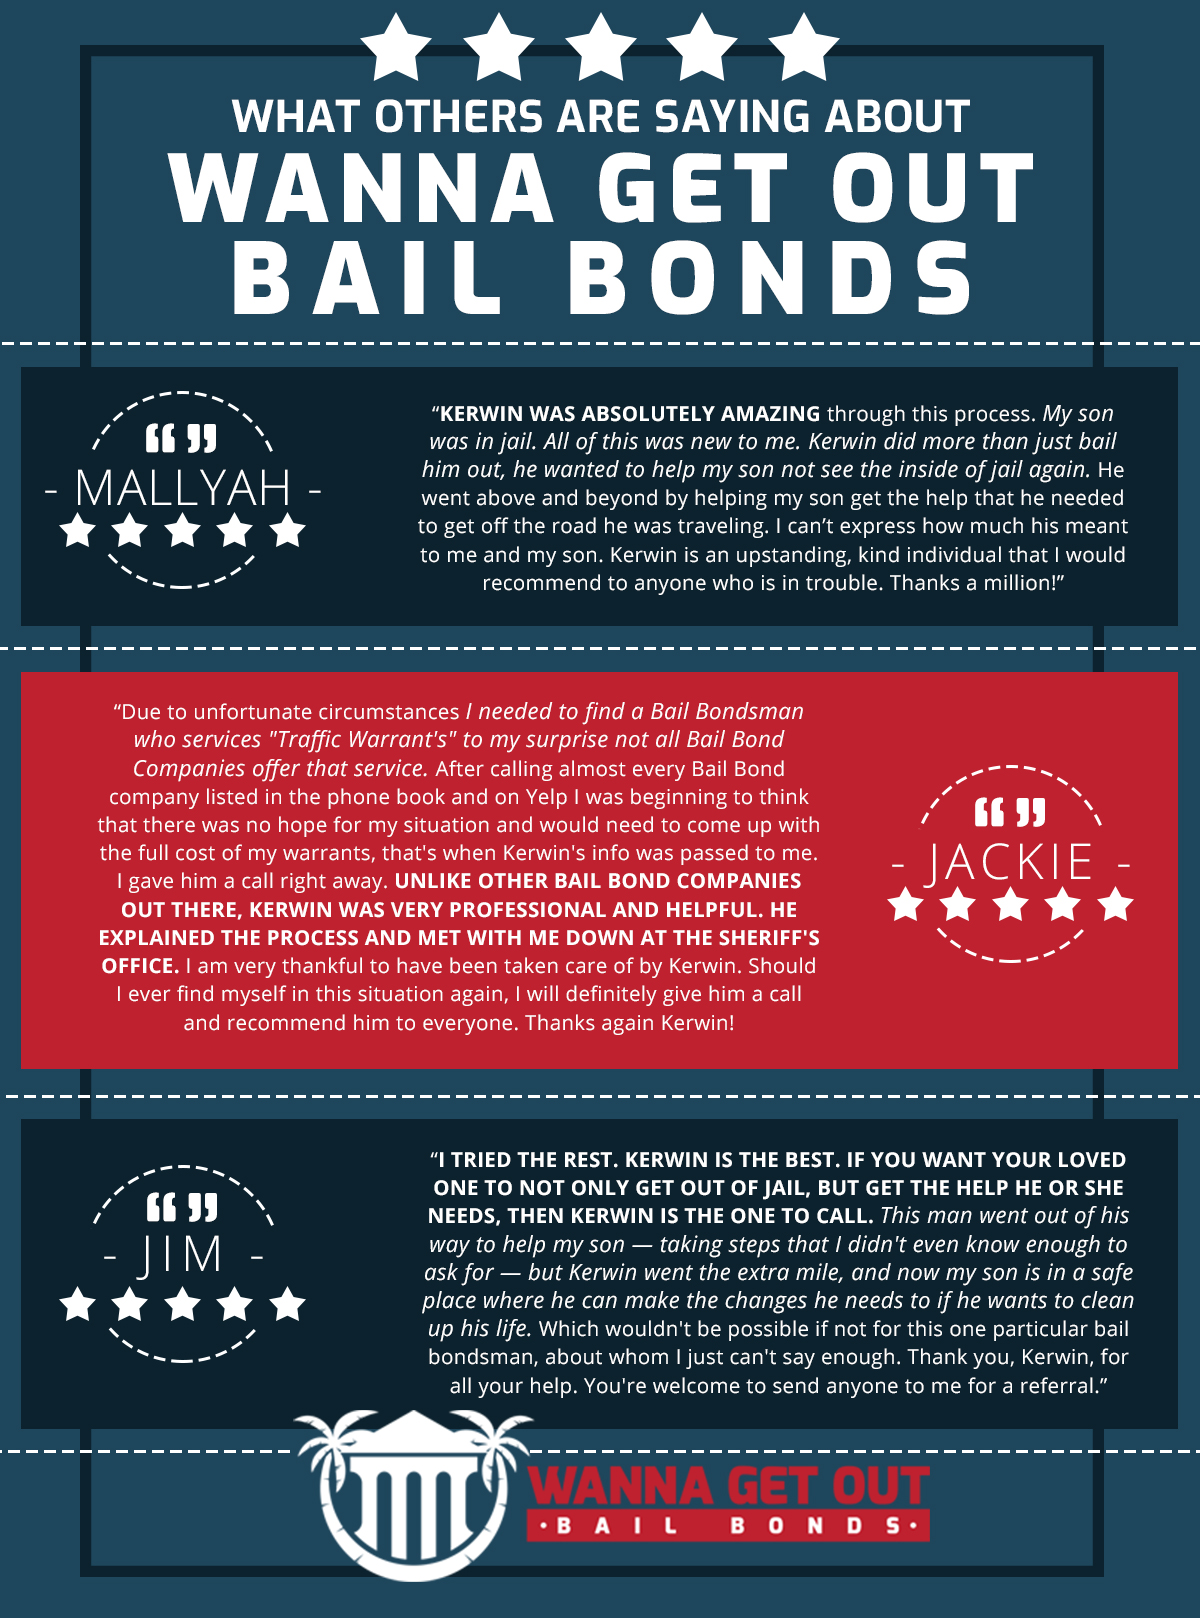 What Others Are Saying About Wanna Get Out Bail Bonds Knowing what people who have worked with us have to say about our work goes a long way. That’s why we’d like to highlight a couple of our recent reviews. Check them out below. “Kerwin was absolutely amazing through this process. My son was in jail. All of this was new to me. Kerwin did more than just bail him out, he wanted to help my son not see the inside of jail again. He went above and beyond by helping my son get the help that he needed to get off the road he was traveling. I can’t express how much his meant to me and my son. Kerwin is an upstanding, kind individual that I would recommend to anyone who is in trouble. Thanks a million!” - Mallyah “I tried the rest. Kerwin is the best. If you want your loved one to not only get out of jail, but get the help he or she needs, then Kerwin is the one to call. This man went out of his way to help my son — taking steps that I didn't even know enough to ask for — but Kerwin went the extra mile, and now my son is in a safe place where he can make the changes he needs to if he wants to clean up his life. Which wouldn't be possible if not for this one particular bail bondsman, about whom I just can't say enough. Thank you, Kerwin, for all your help. You're welcome to send anyone to me for a referral.” - Jim “Due to unfortunate circumstances I needed to find a Bail Bondsman who services "Traffic Warrant's" to my surprise not all Bail Bond Companies offer that service. After calling almost every Bail Bond company listed in the phone book and on Yelp I was beginning to think that there was no hope for my situation and would need to come up with the full cost of my warrants, that's when Kerwin's info was passed to me. I gave him a call right away. Unlike other Bail Bond companies out there, Kerwin was very professional and helpful. He explained the process and met with me down at the sheriff's office. I am very thankful to have been taken care of by Kerwin. Should I ever find myself in this situation again, I will definitely give him a call and recommend him to everyone. Thanks again Kerwin!” - Jackie Contact Kerwin and the team at Wanna Get Out Bail Bonds today!